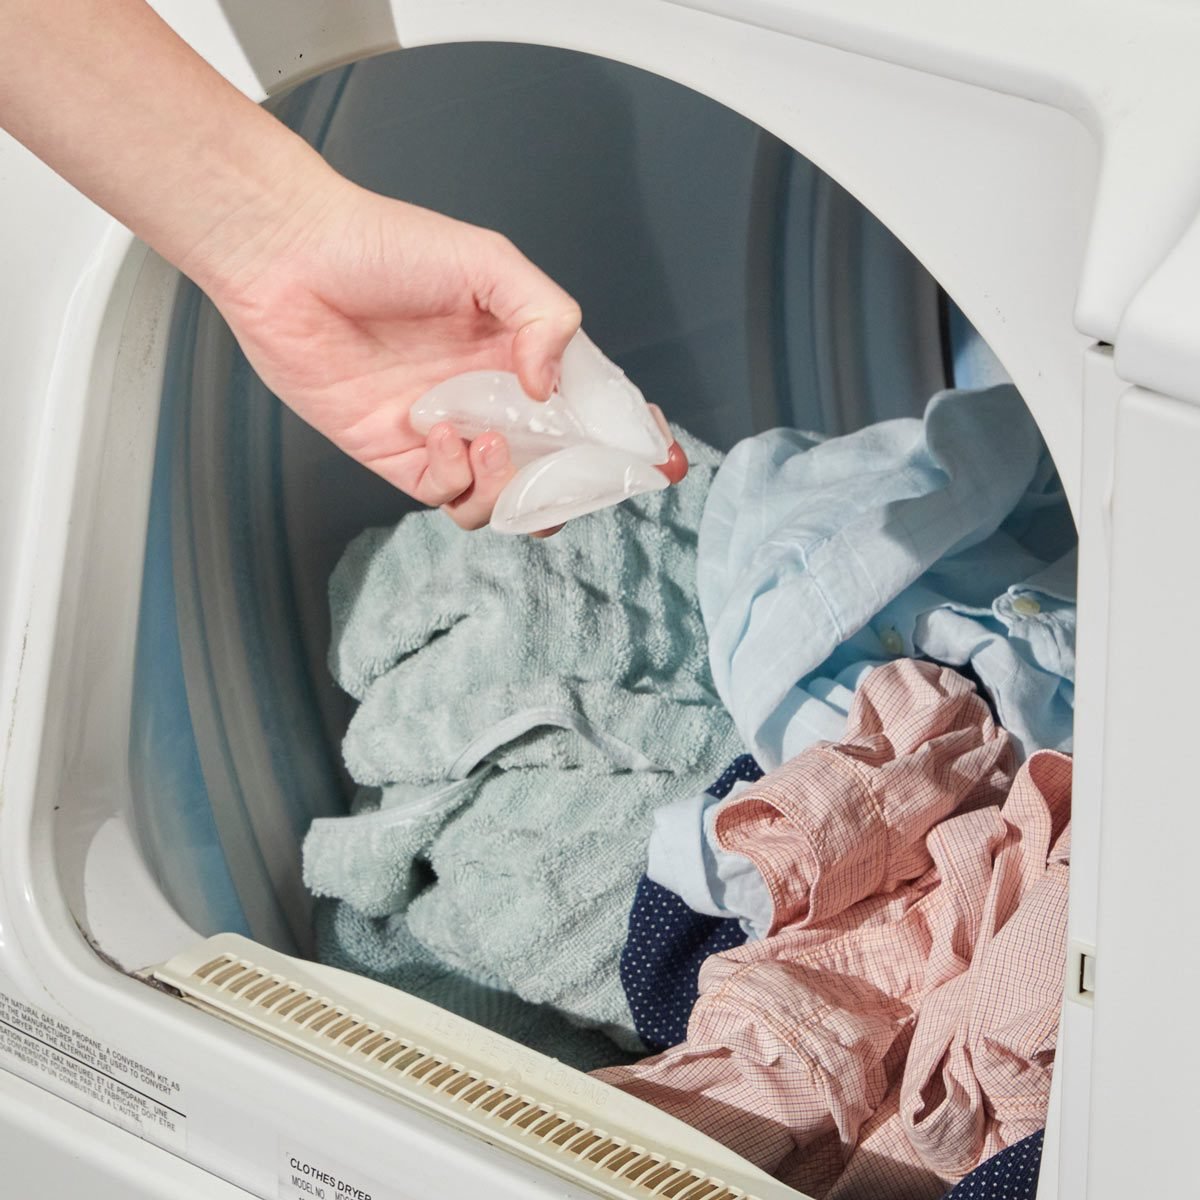 Save Hundreds in Dry-Cleaning Bills With This Easy, At-Home Laundry Hack